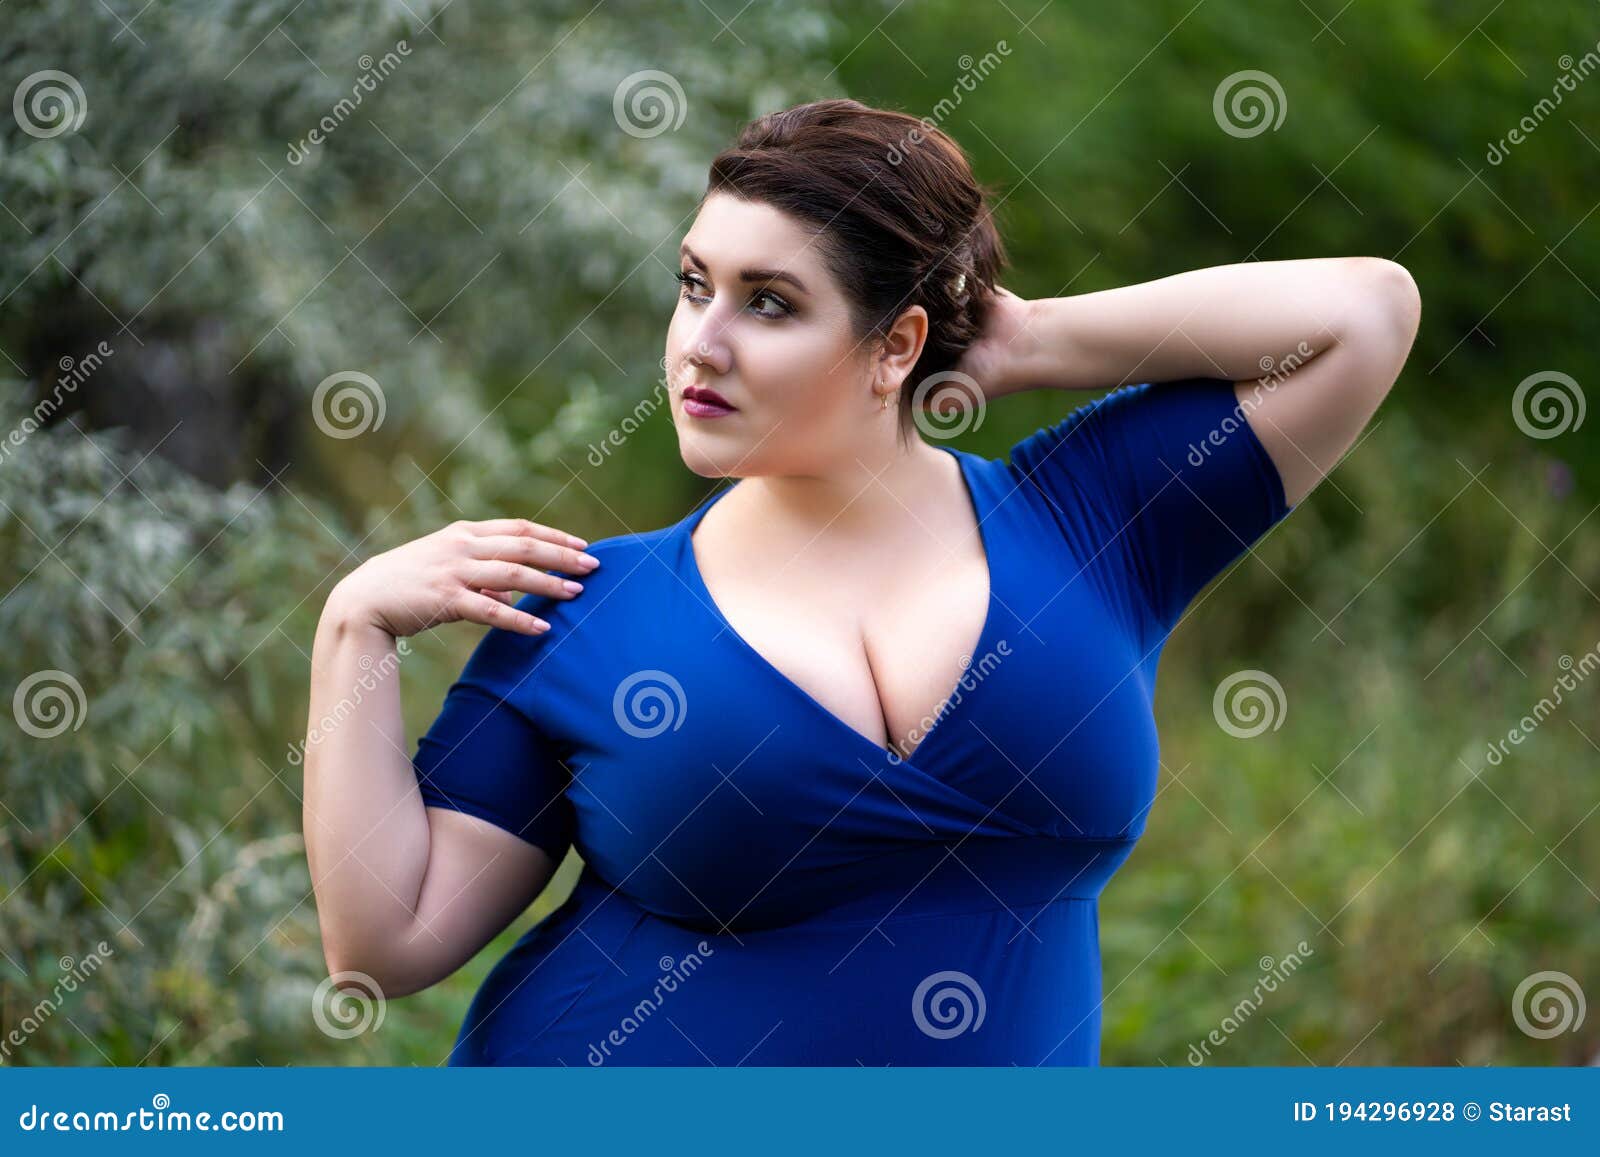 brittany awonohopay recommends Big Tits Blue Dress